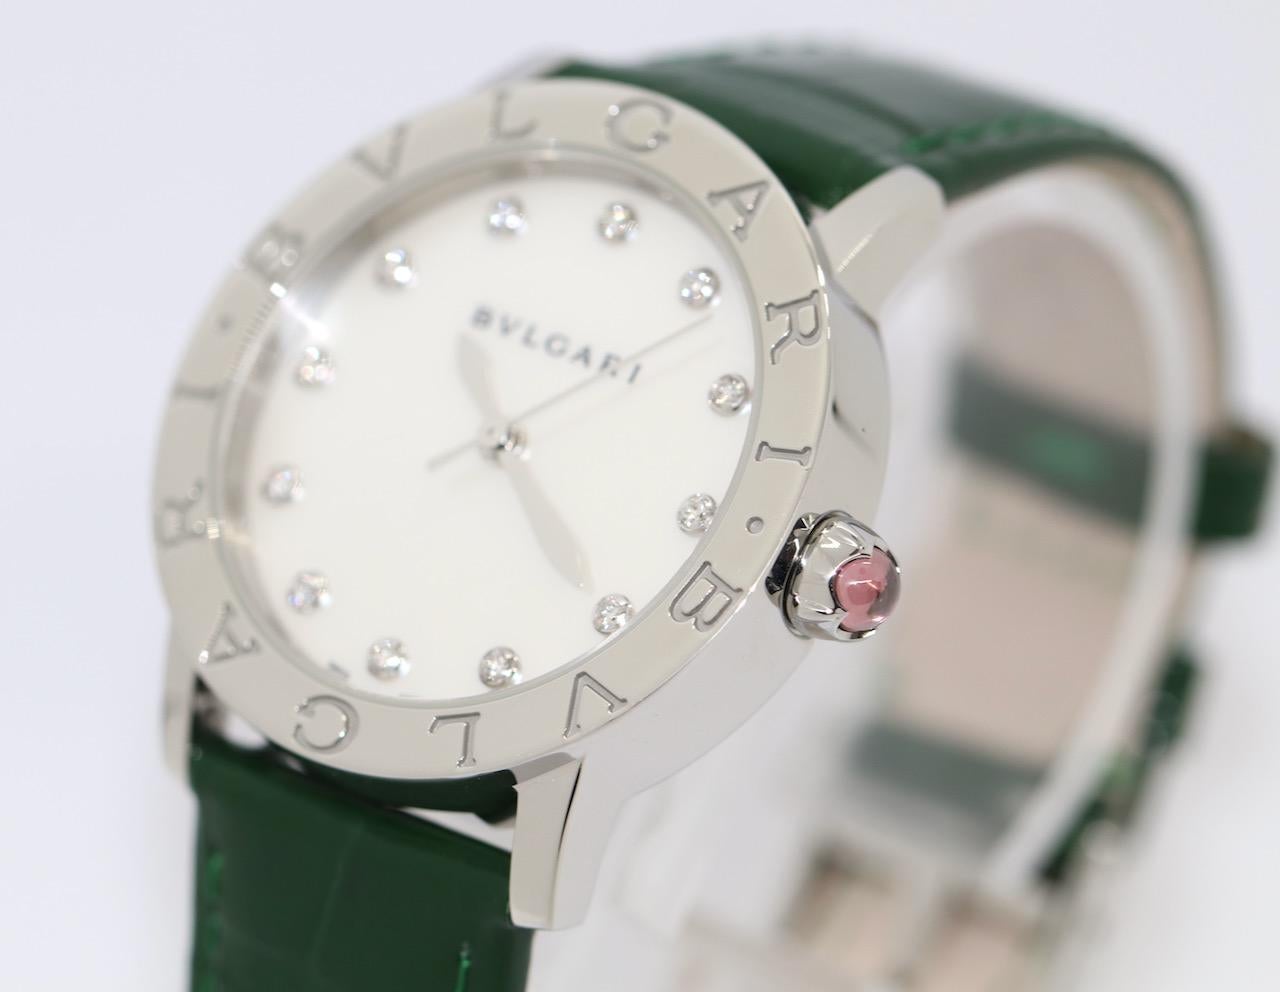 Bvlgari Ladies Wrist Watch Automatic with Diamonds and MOP Dial. Ref. BBL33S

Bulgari remaining guarantee until 09/23. With original new unworn Bulgari strap. 
From first owner. Excellent condition. Including original Box and papers.

Diameter